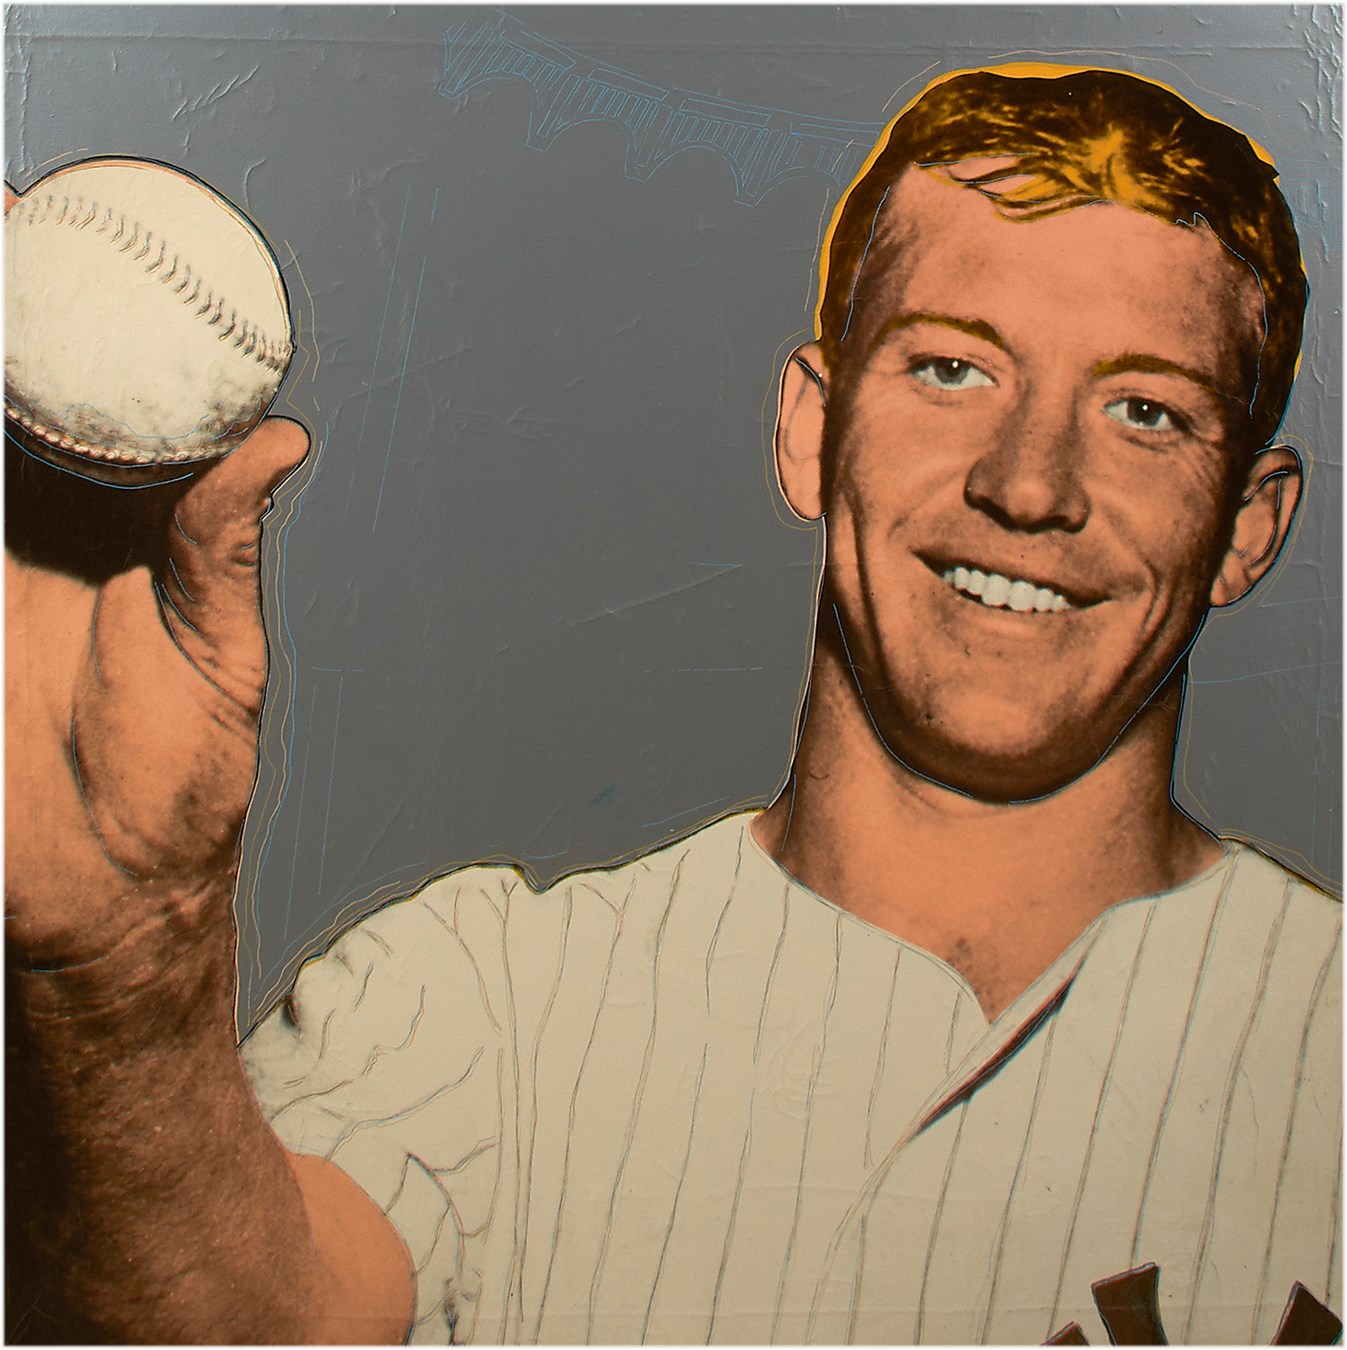 Sports Fine Art - Mickey Mantle Handpainted Oil Over Silkscreen Painting by Steve Kaufman - Mickey's Personal Copy That Hung on His Wall